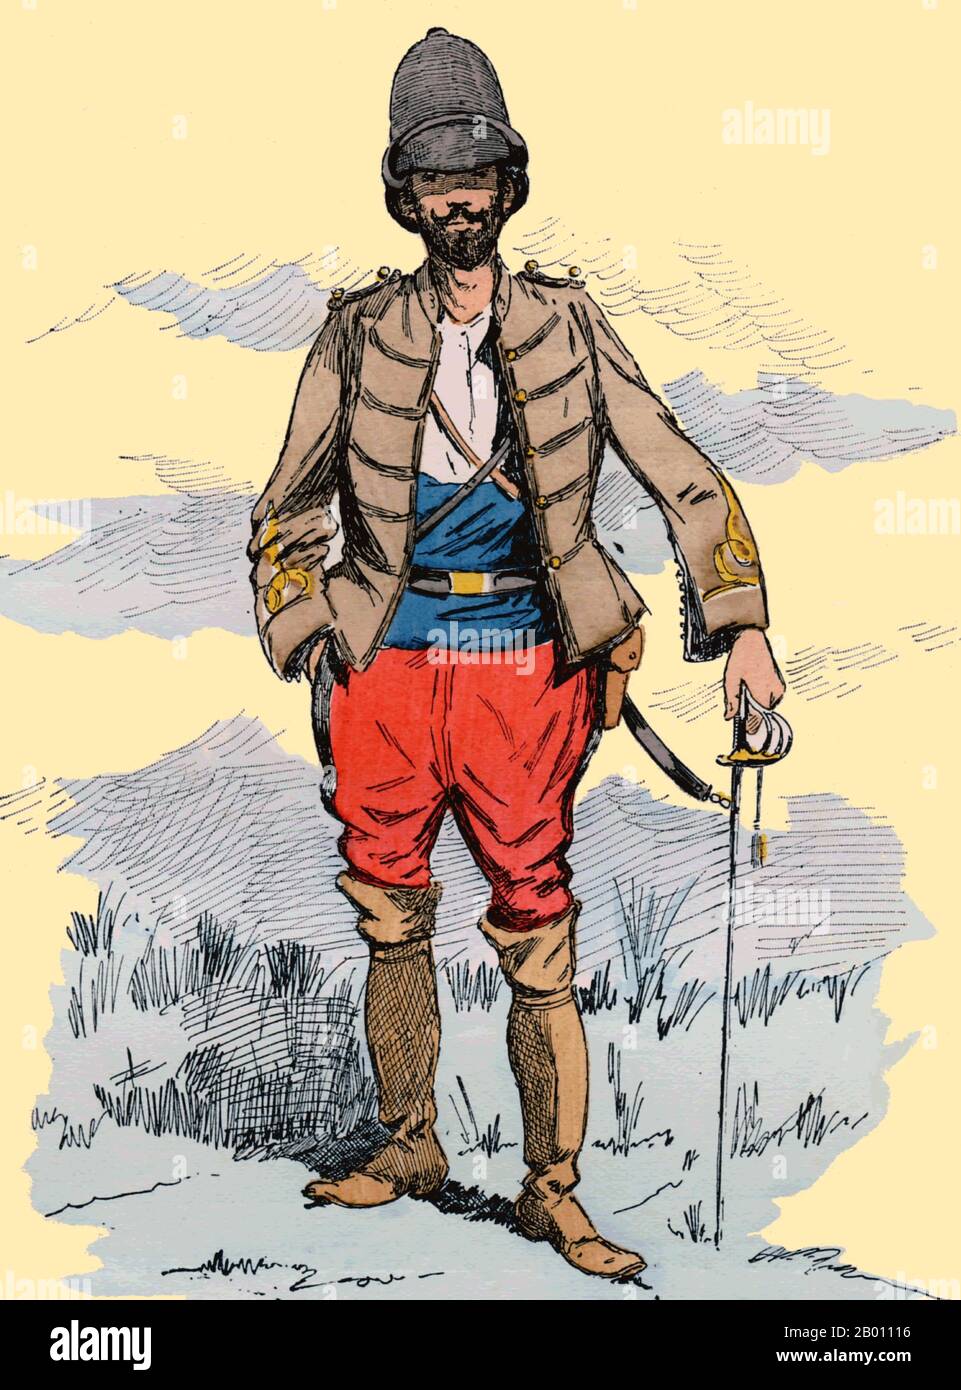 Vietnam: A French zouave officer in Tonkin. Illustration by Maurice Rollet de l'Isle (1859-1943), 1885.  Zouave was the title given to certain light infantry regiments in the French Army, normally serving in French North Africa between 1831 and 1962. The name was also adopted during the 19th century by units in other armies, especially volunteer regiments raised for service in the American Civil War. The characteristic zouave uniform included short open-fronted jackets, baggy trousers and often sashes and oriental headgear. Stock Photo